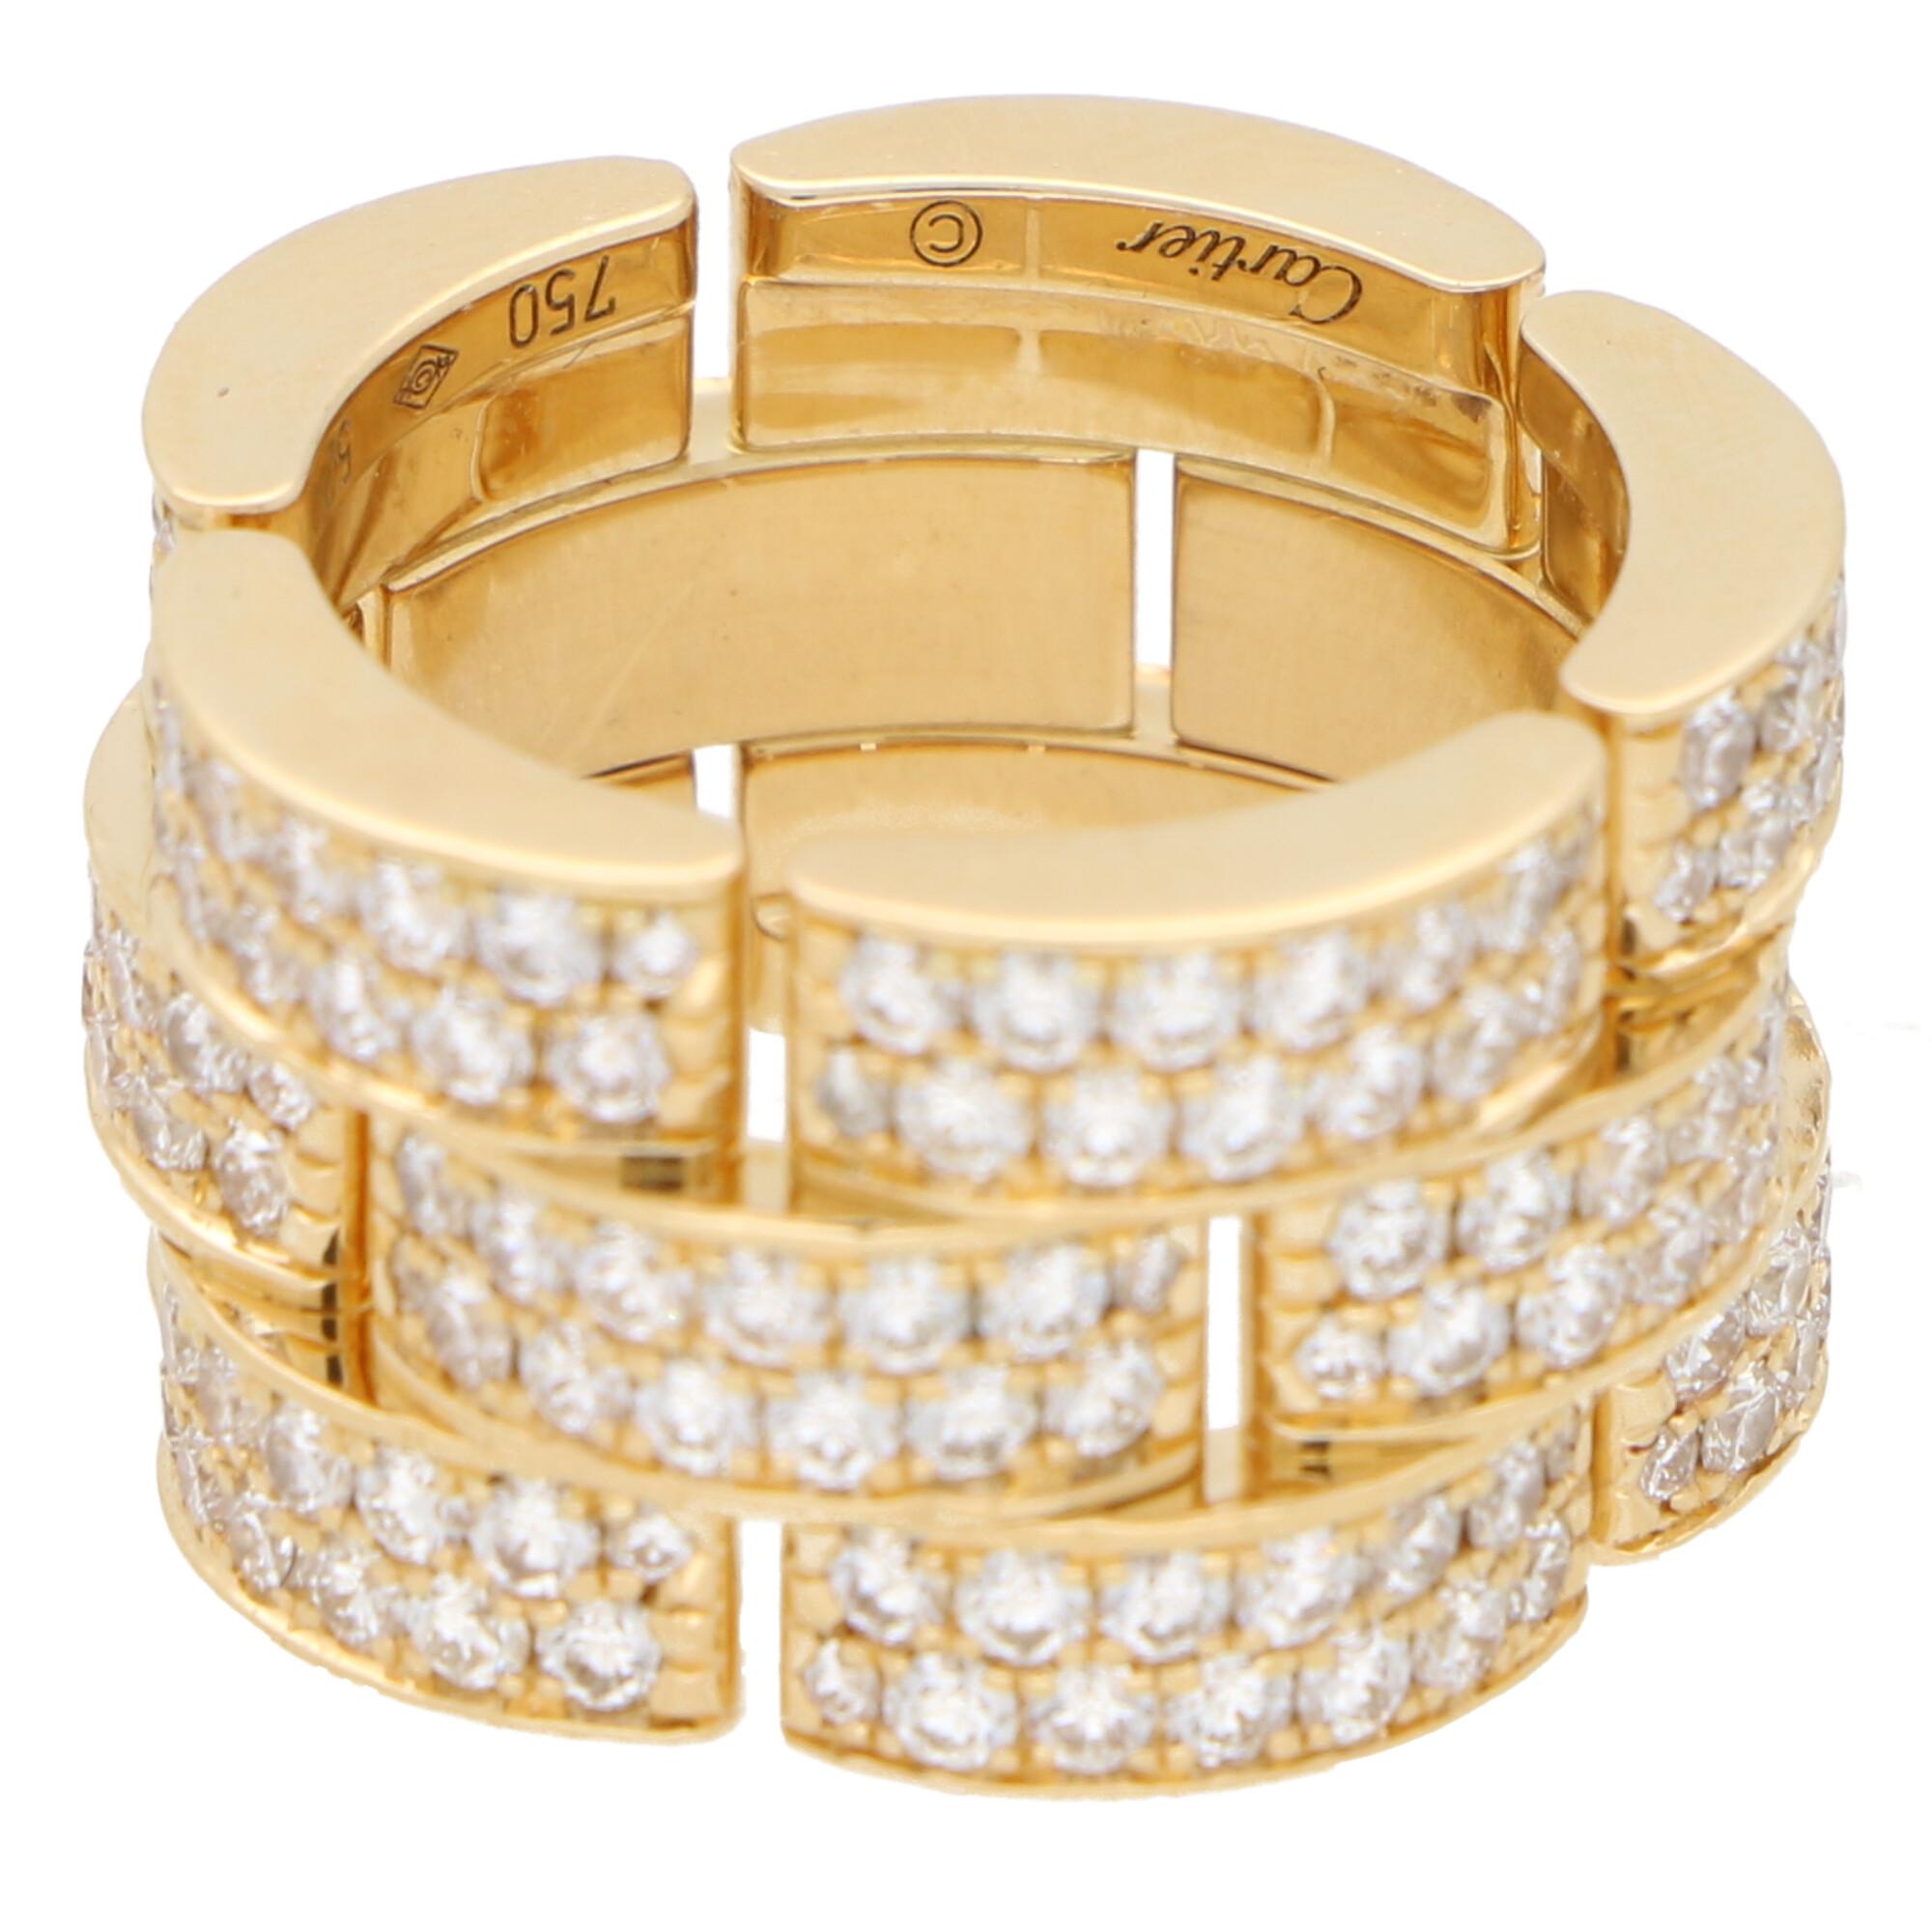 Modern Vintage Cartier Three Row Maillon Panthère Bombè Ring Set in 18k Yellow Gold